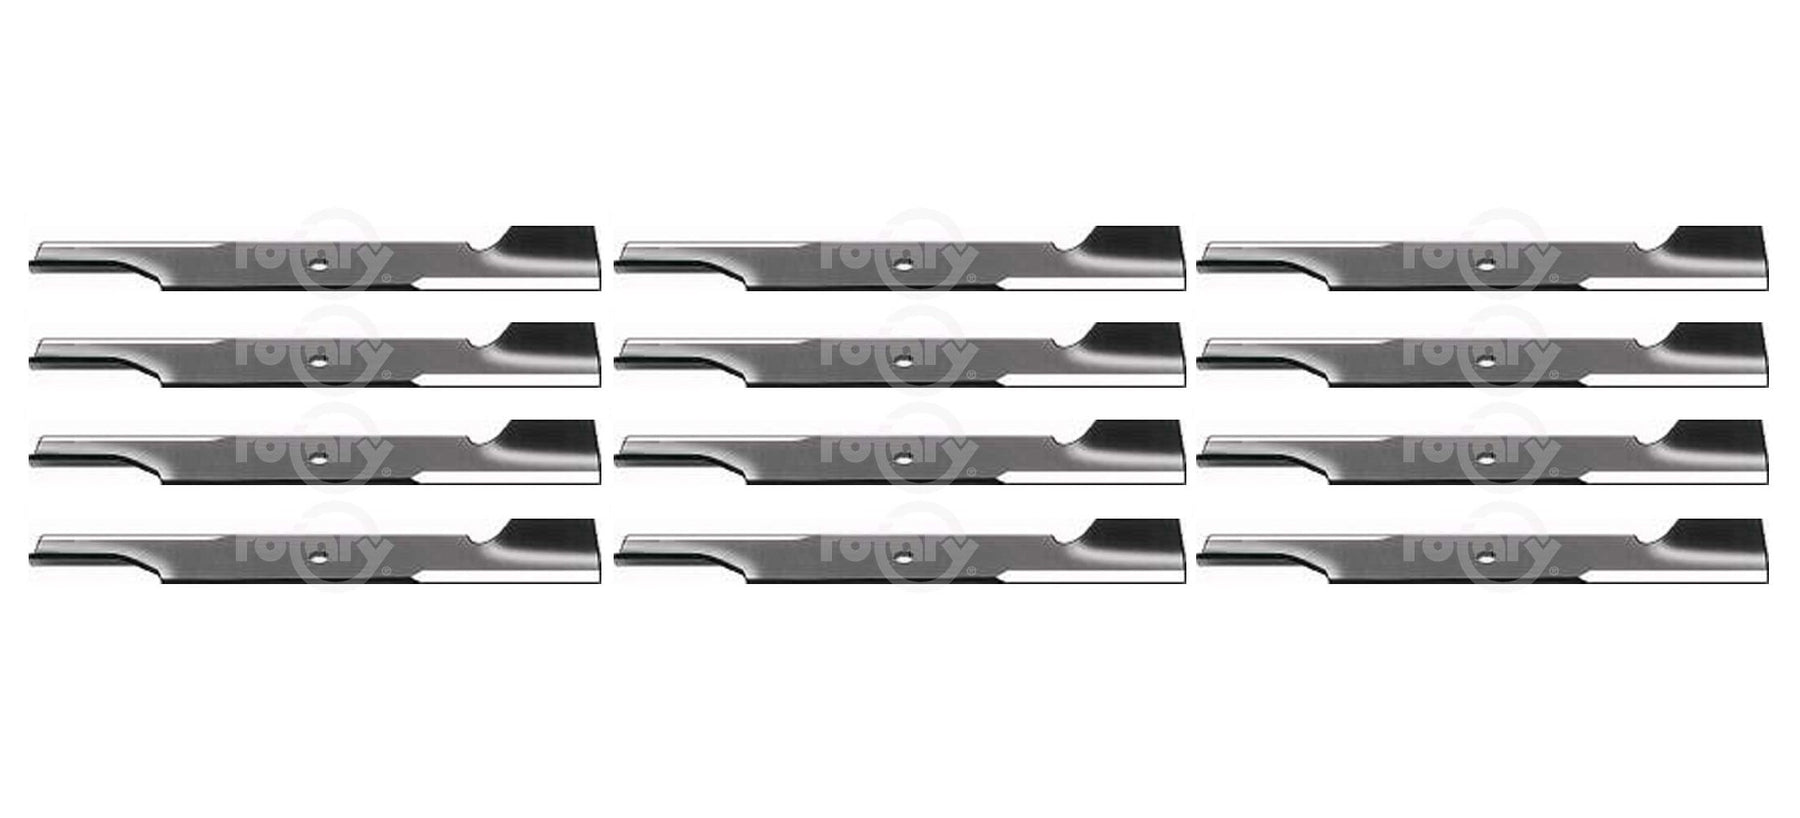 12 Pack Lawn Mower Blades Fits Scag A48110 481706 482461 482877 48110